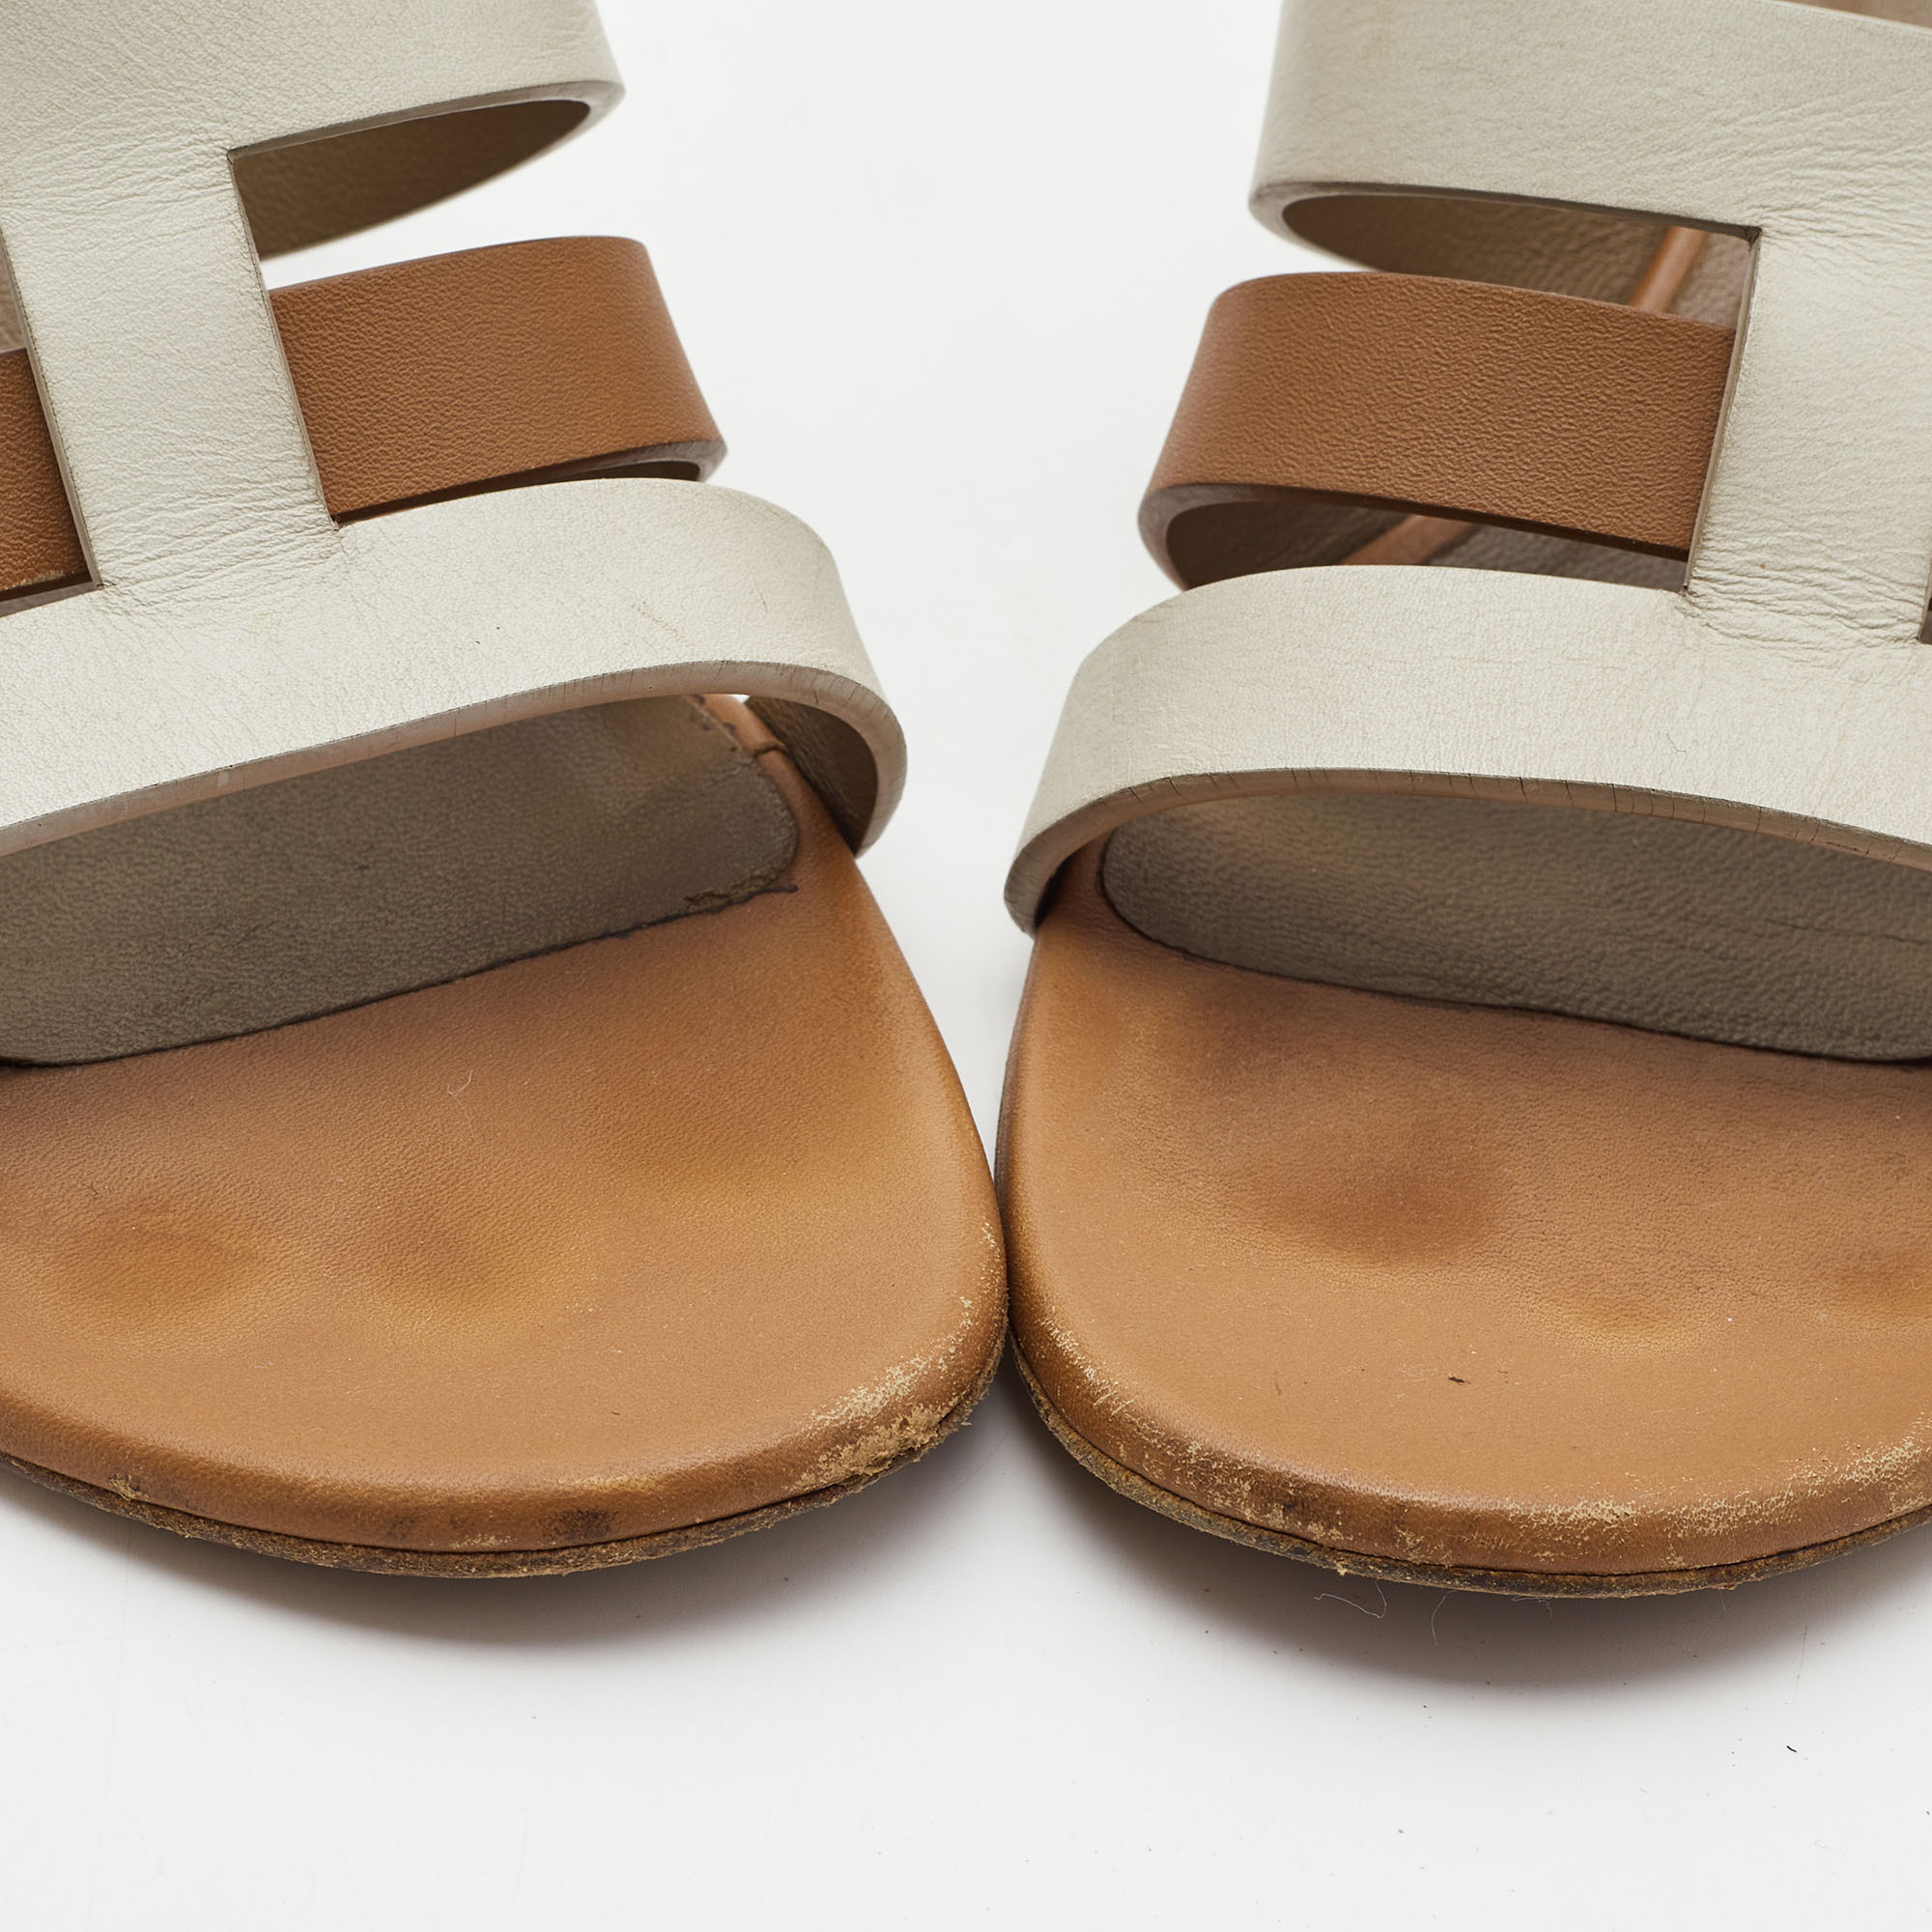 Hermes Brown/White Leather Amica Sandals Size 39.5